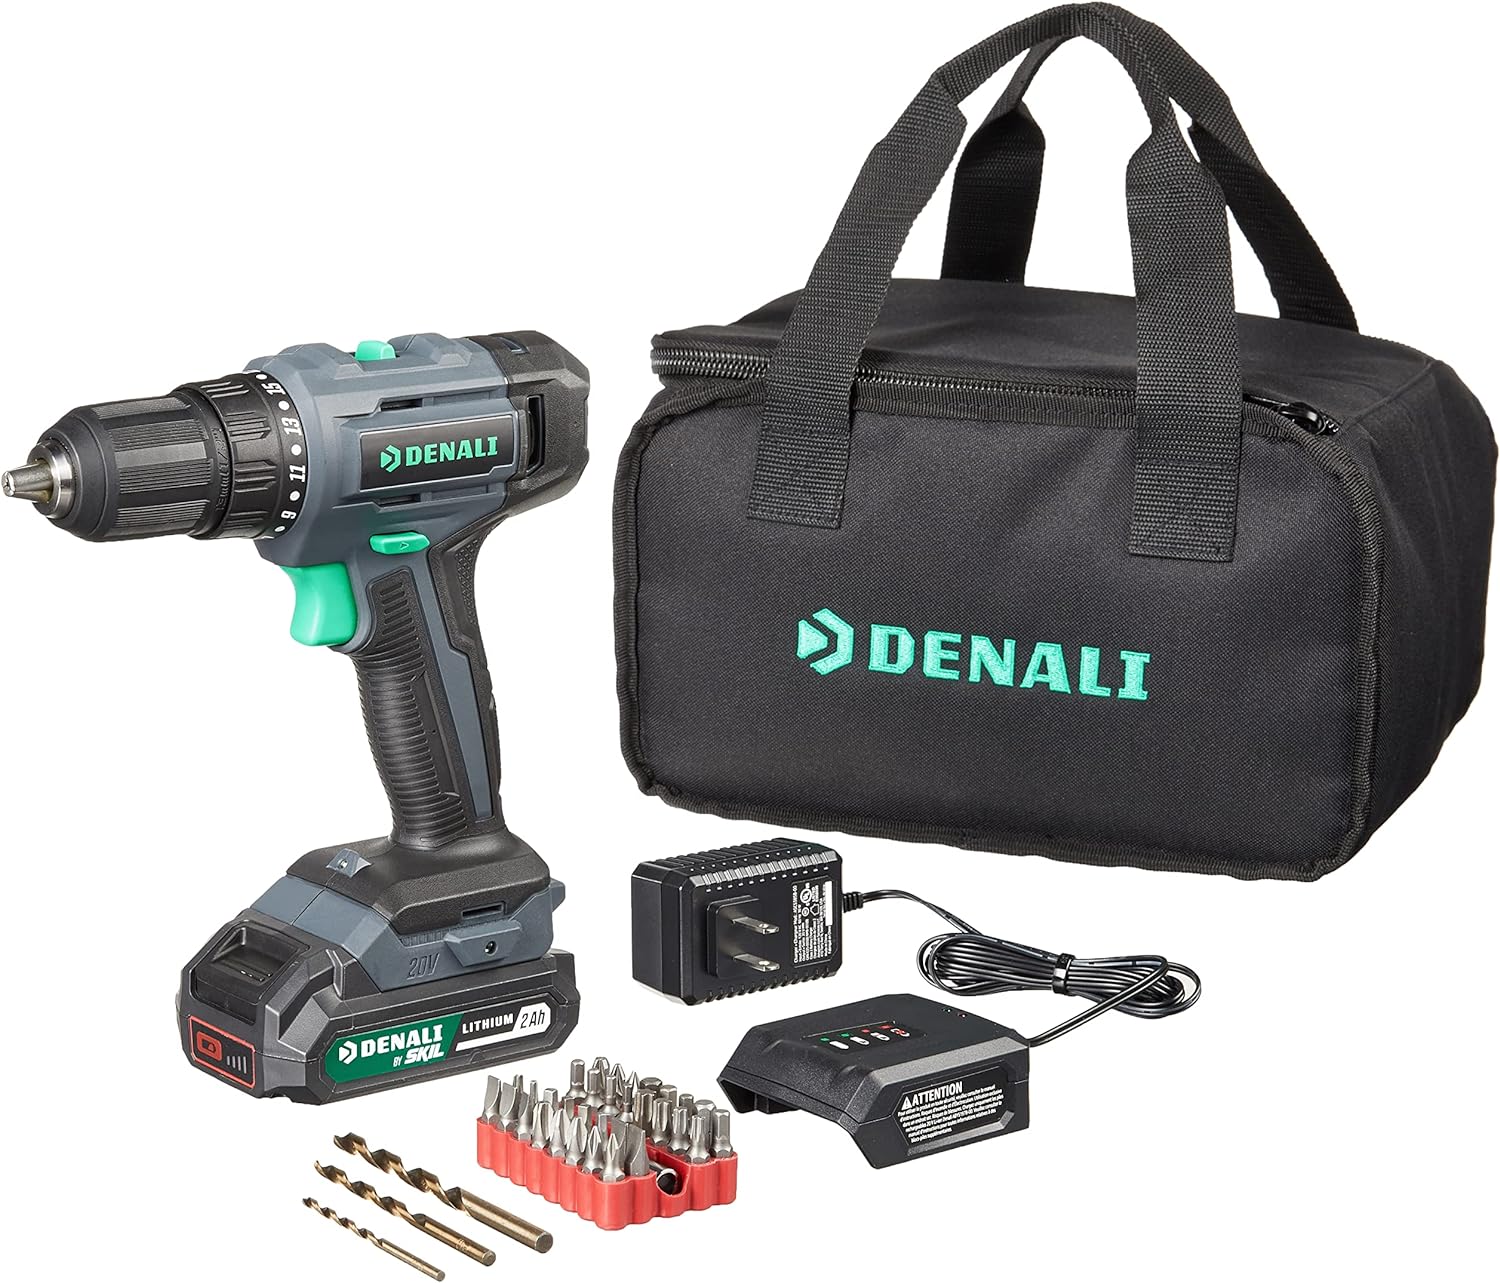 Amazon Brand - Denali By Skil 20V Drill Driver Kit With 36 Piece Bit Set, Includes 2.0Ah Lithium Battery, 1A Compact Charger And Carry Bag, Blue